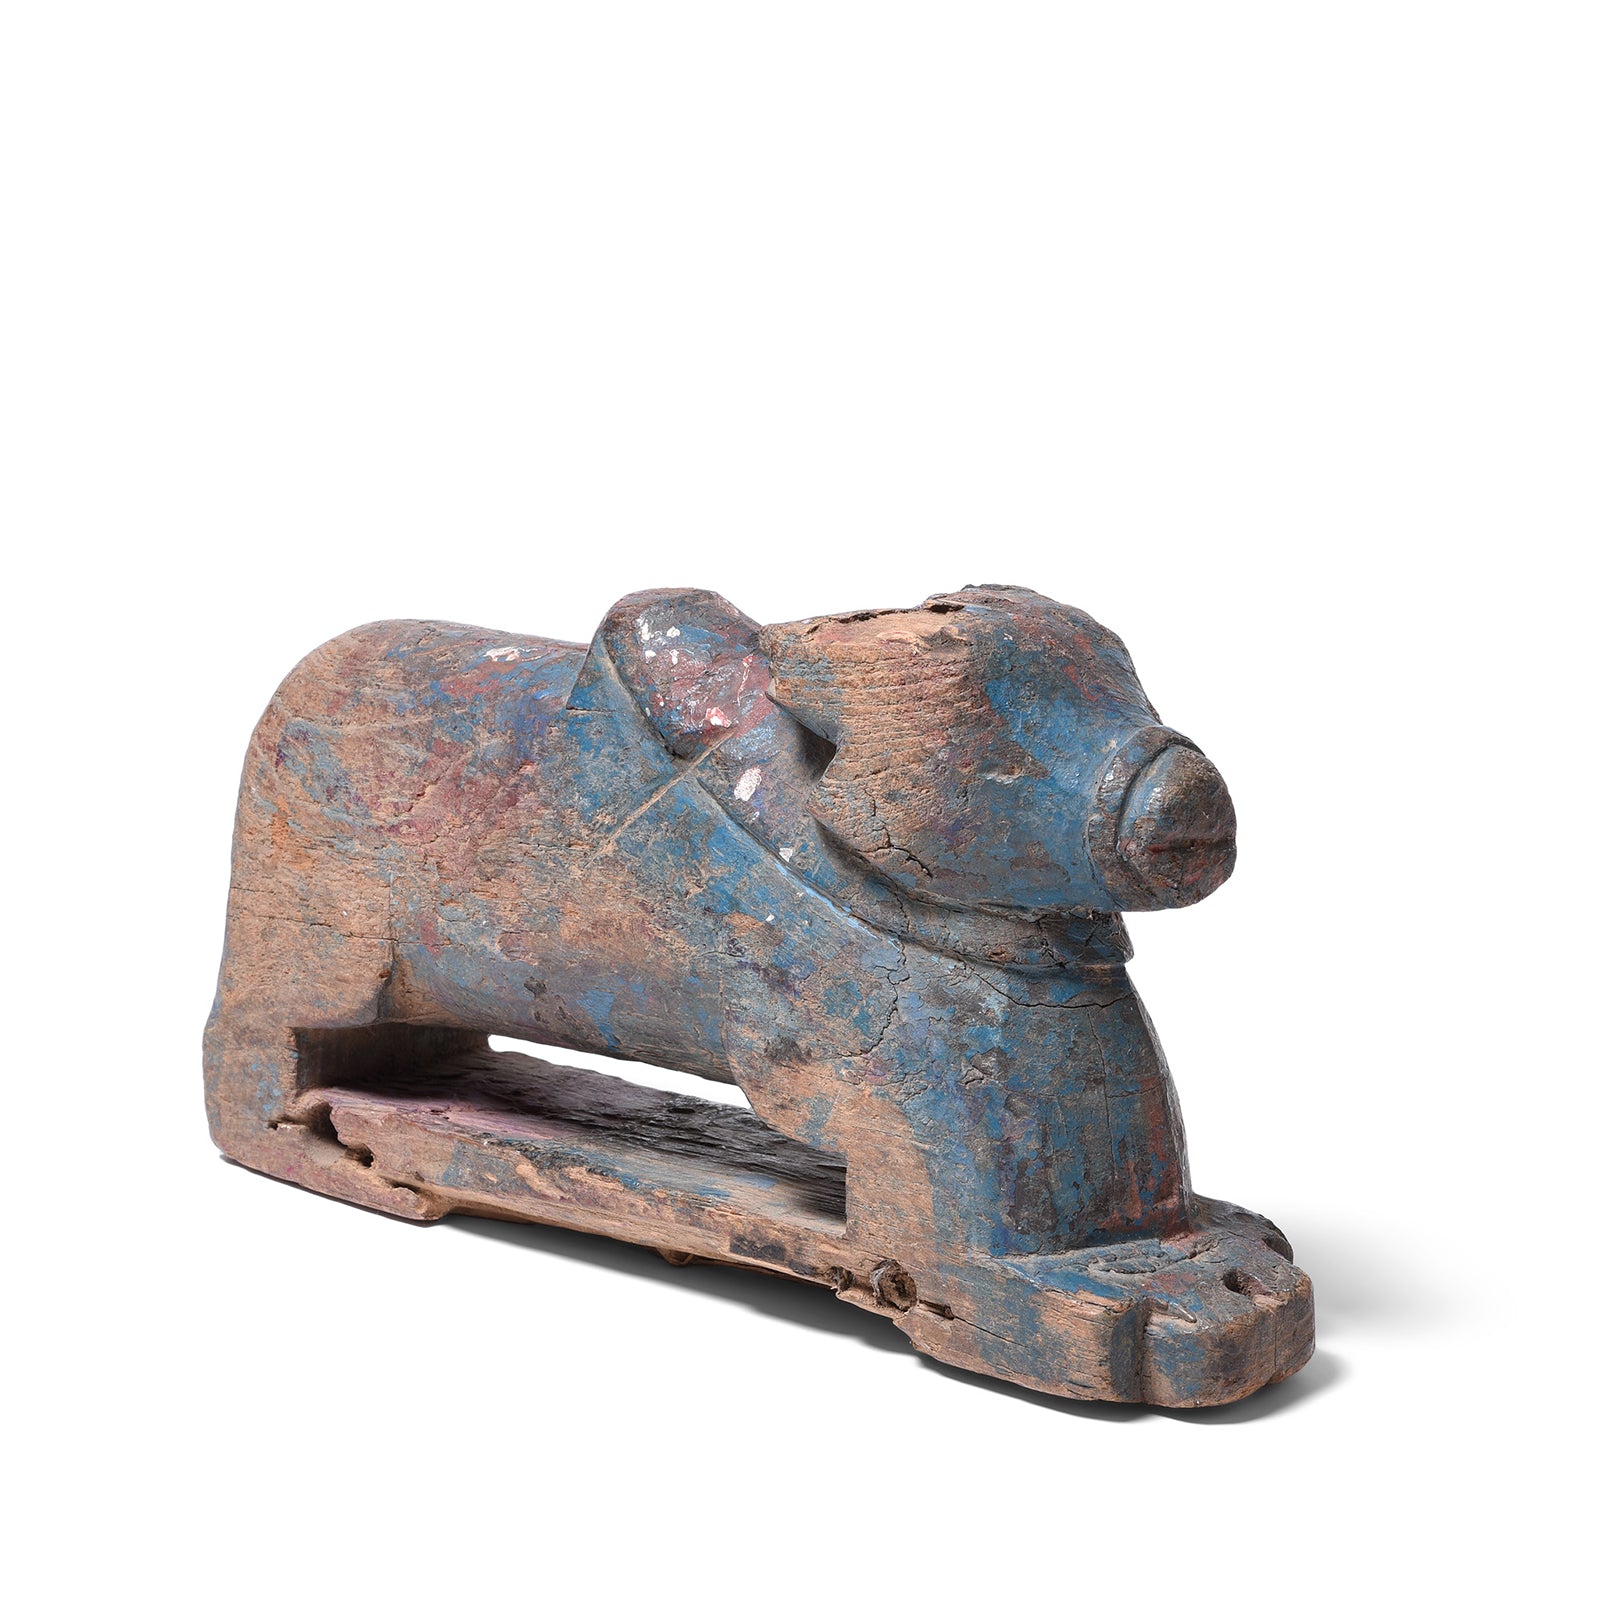 Angled View Of Painted Teak Nandi Bull Toy From Rajasthan | Indigo Antiques